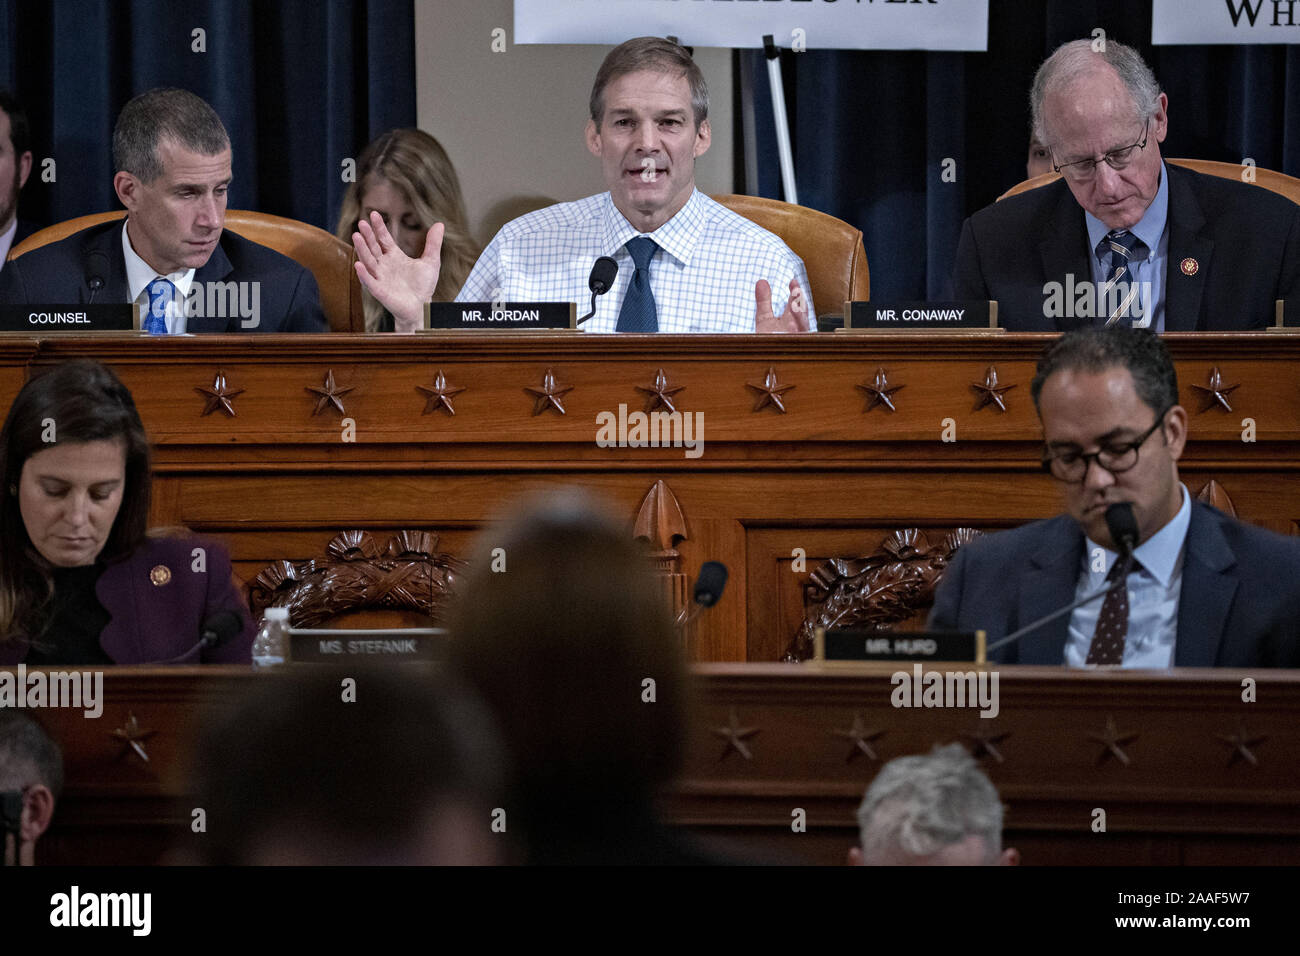 Washington, United States. 21st Nov, 2019. Representative Jim Jordan, a Republican from Ohio, top center, questions witnesses as Steve Castor, general counsel for the Oversight and Government Reform Committee, top left, and Representative Mike Conaway, a Republican from Texas, top right, listen during a House Intelligence Committee impeachment inquiry hearing in Washington, DC, U.S., on Thursday, Nov. 21, 2019. The committee hears from nine witnesses in open hearings this week in the impeachment inquiry into President Donald Trump. Credit: UPI/Alamy Live News Stock Photo